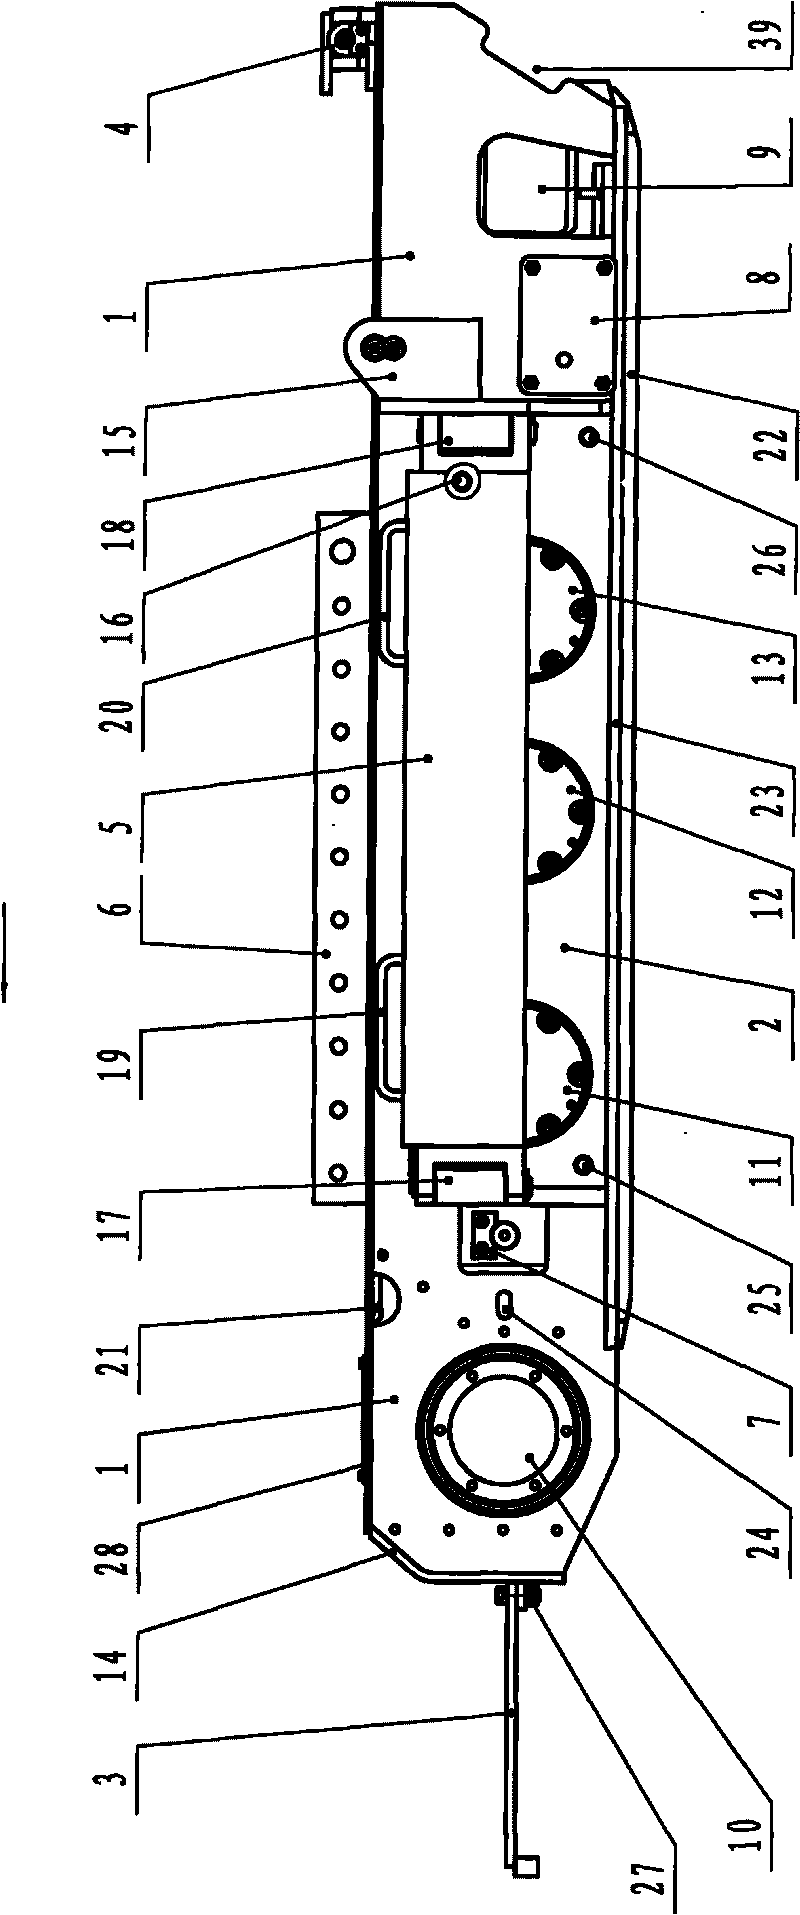 Oil tank-containing track frame of continuous miner